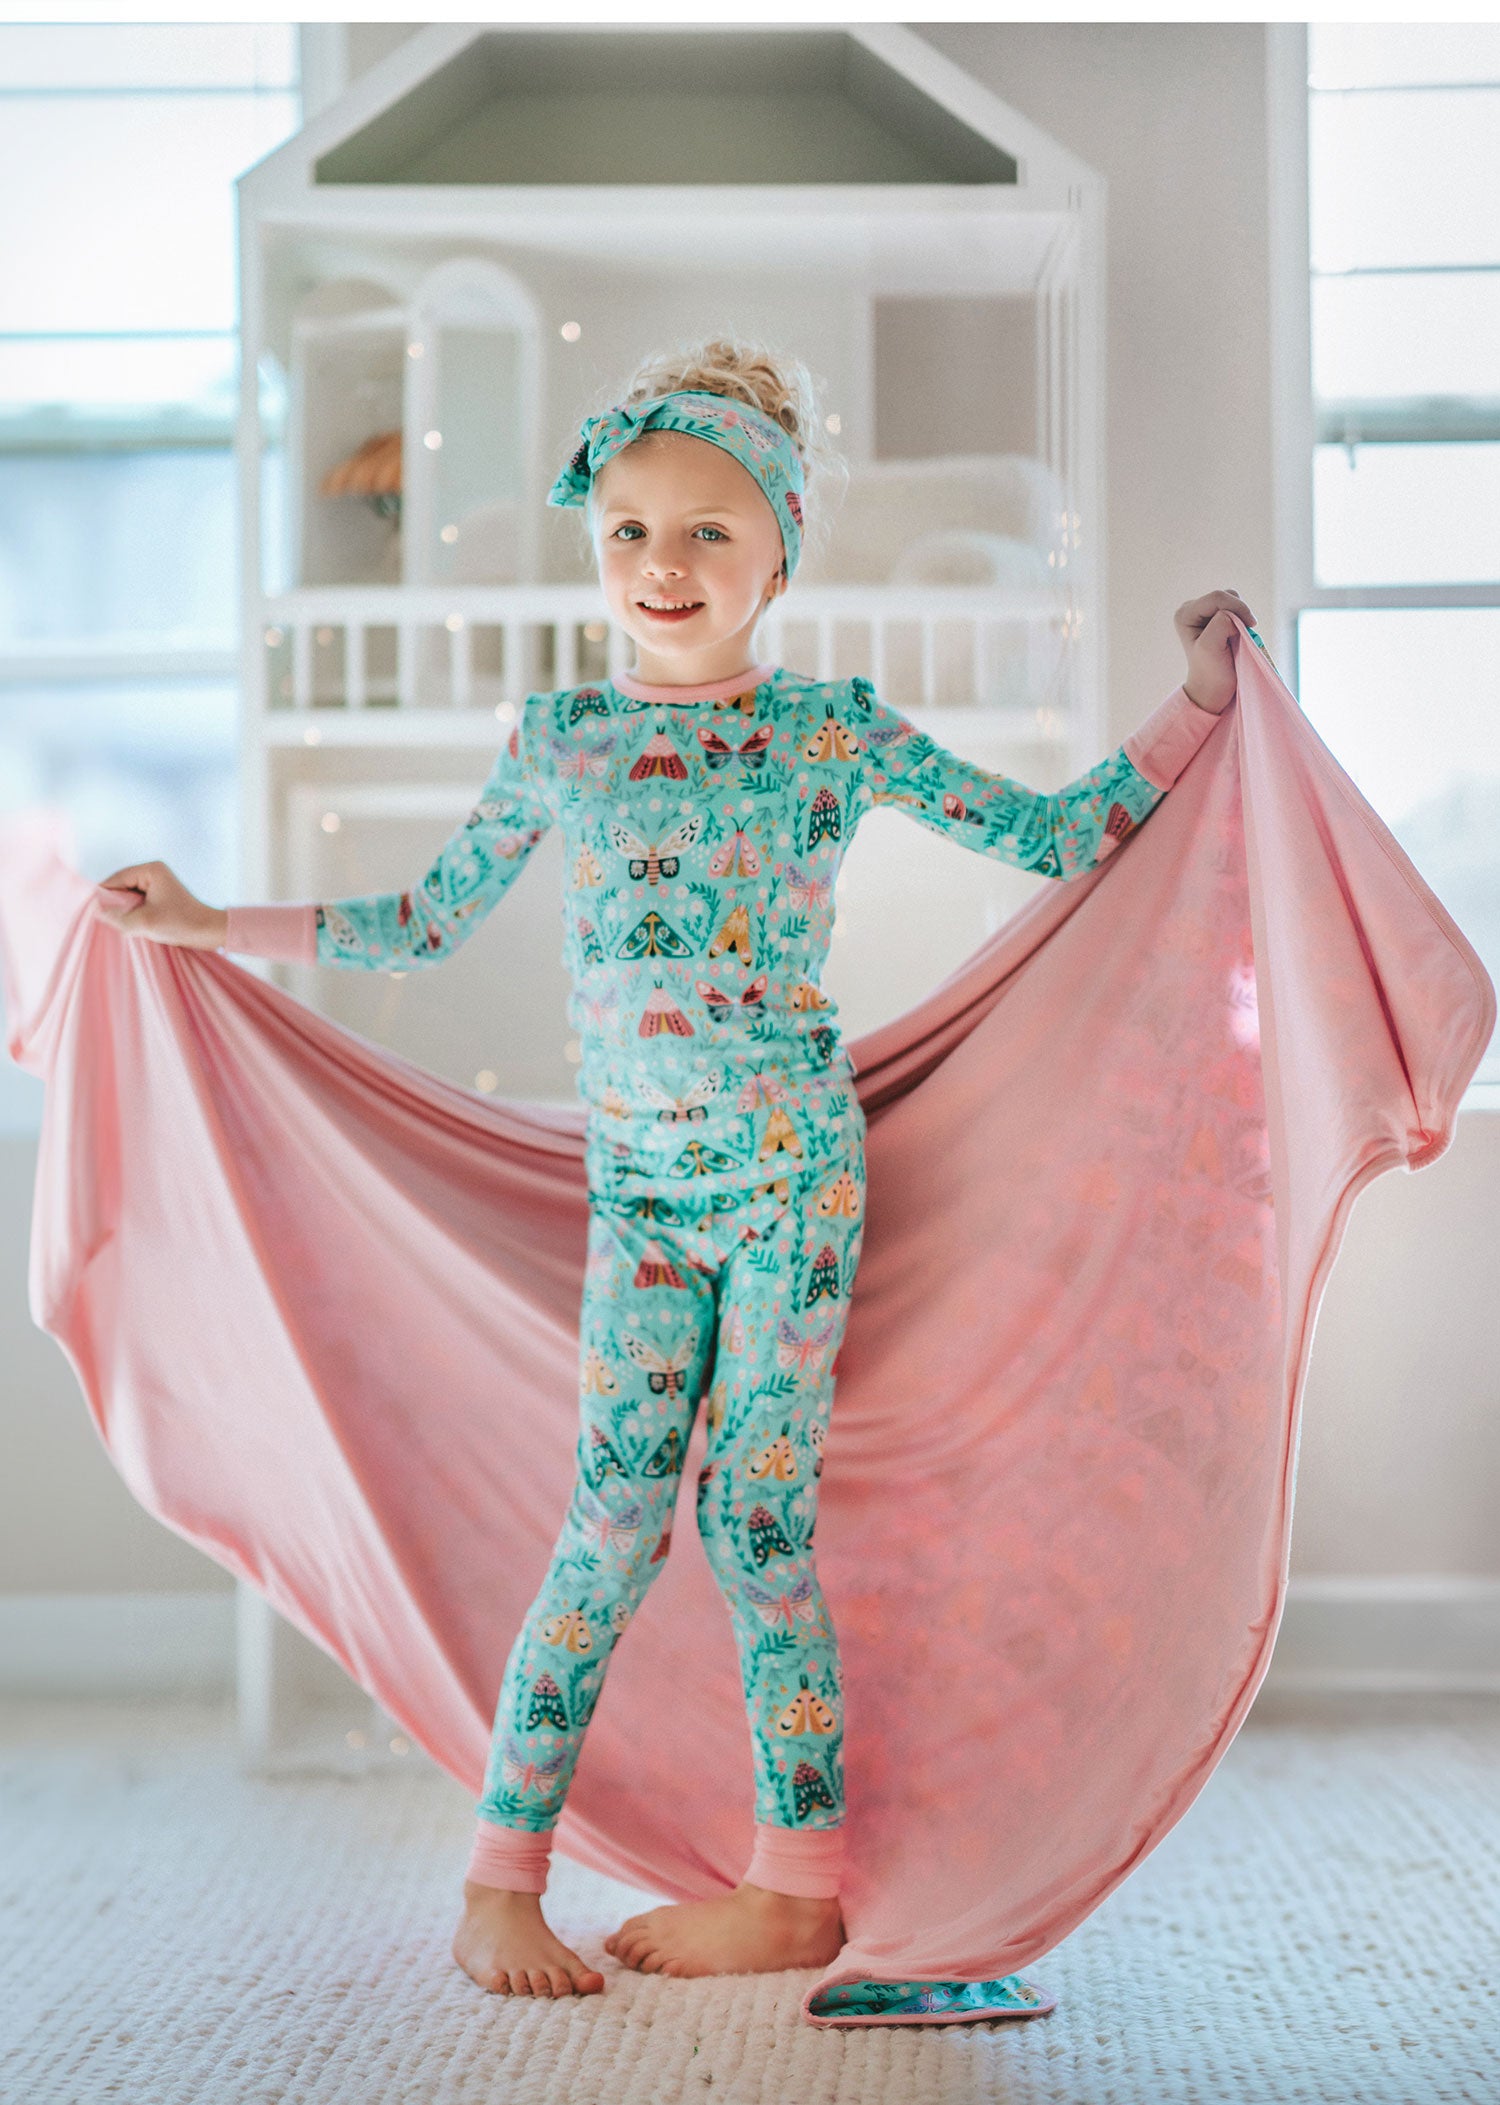 A Parent’s Guide to Choosing the Best Fabric for Baby Clothes